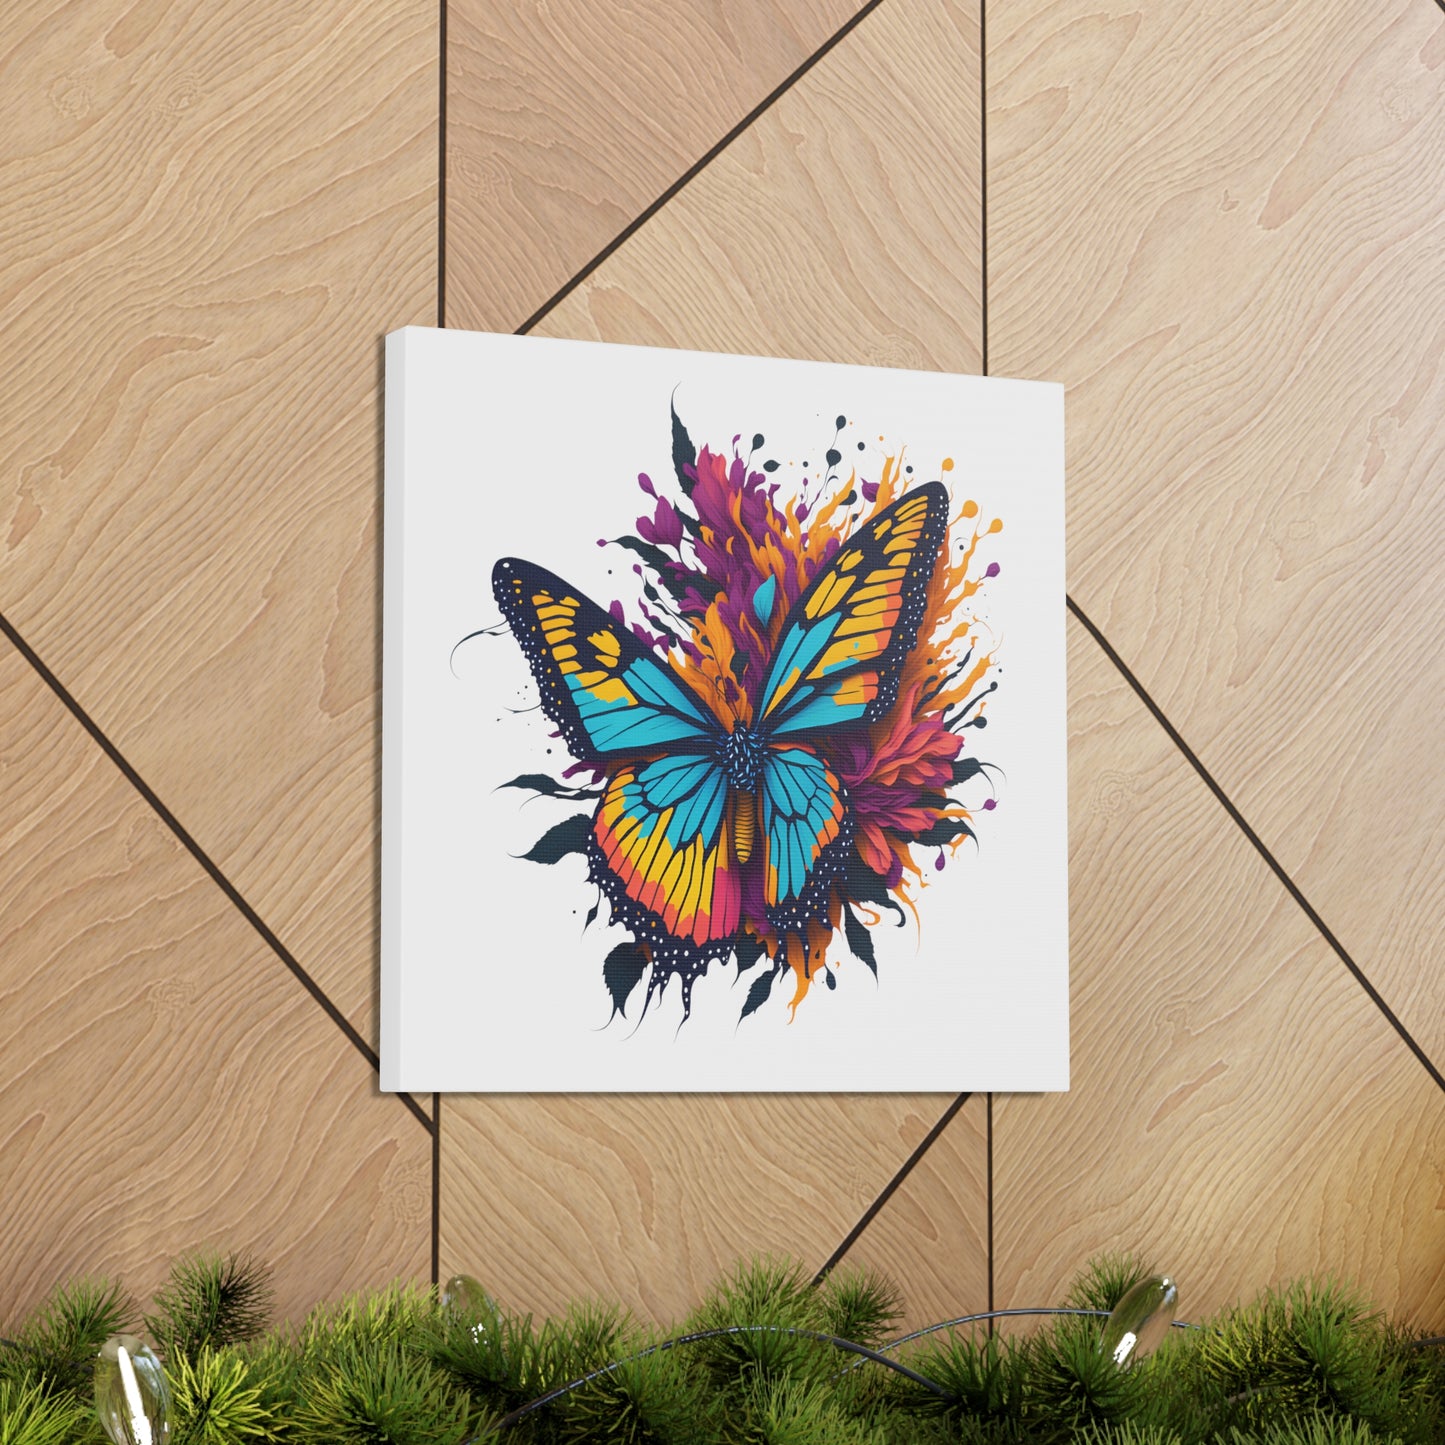 Vibrant Butterfly Canvas Gallery Wrap